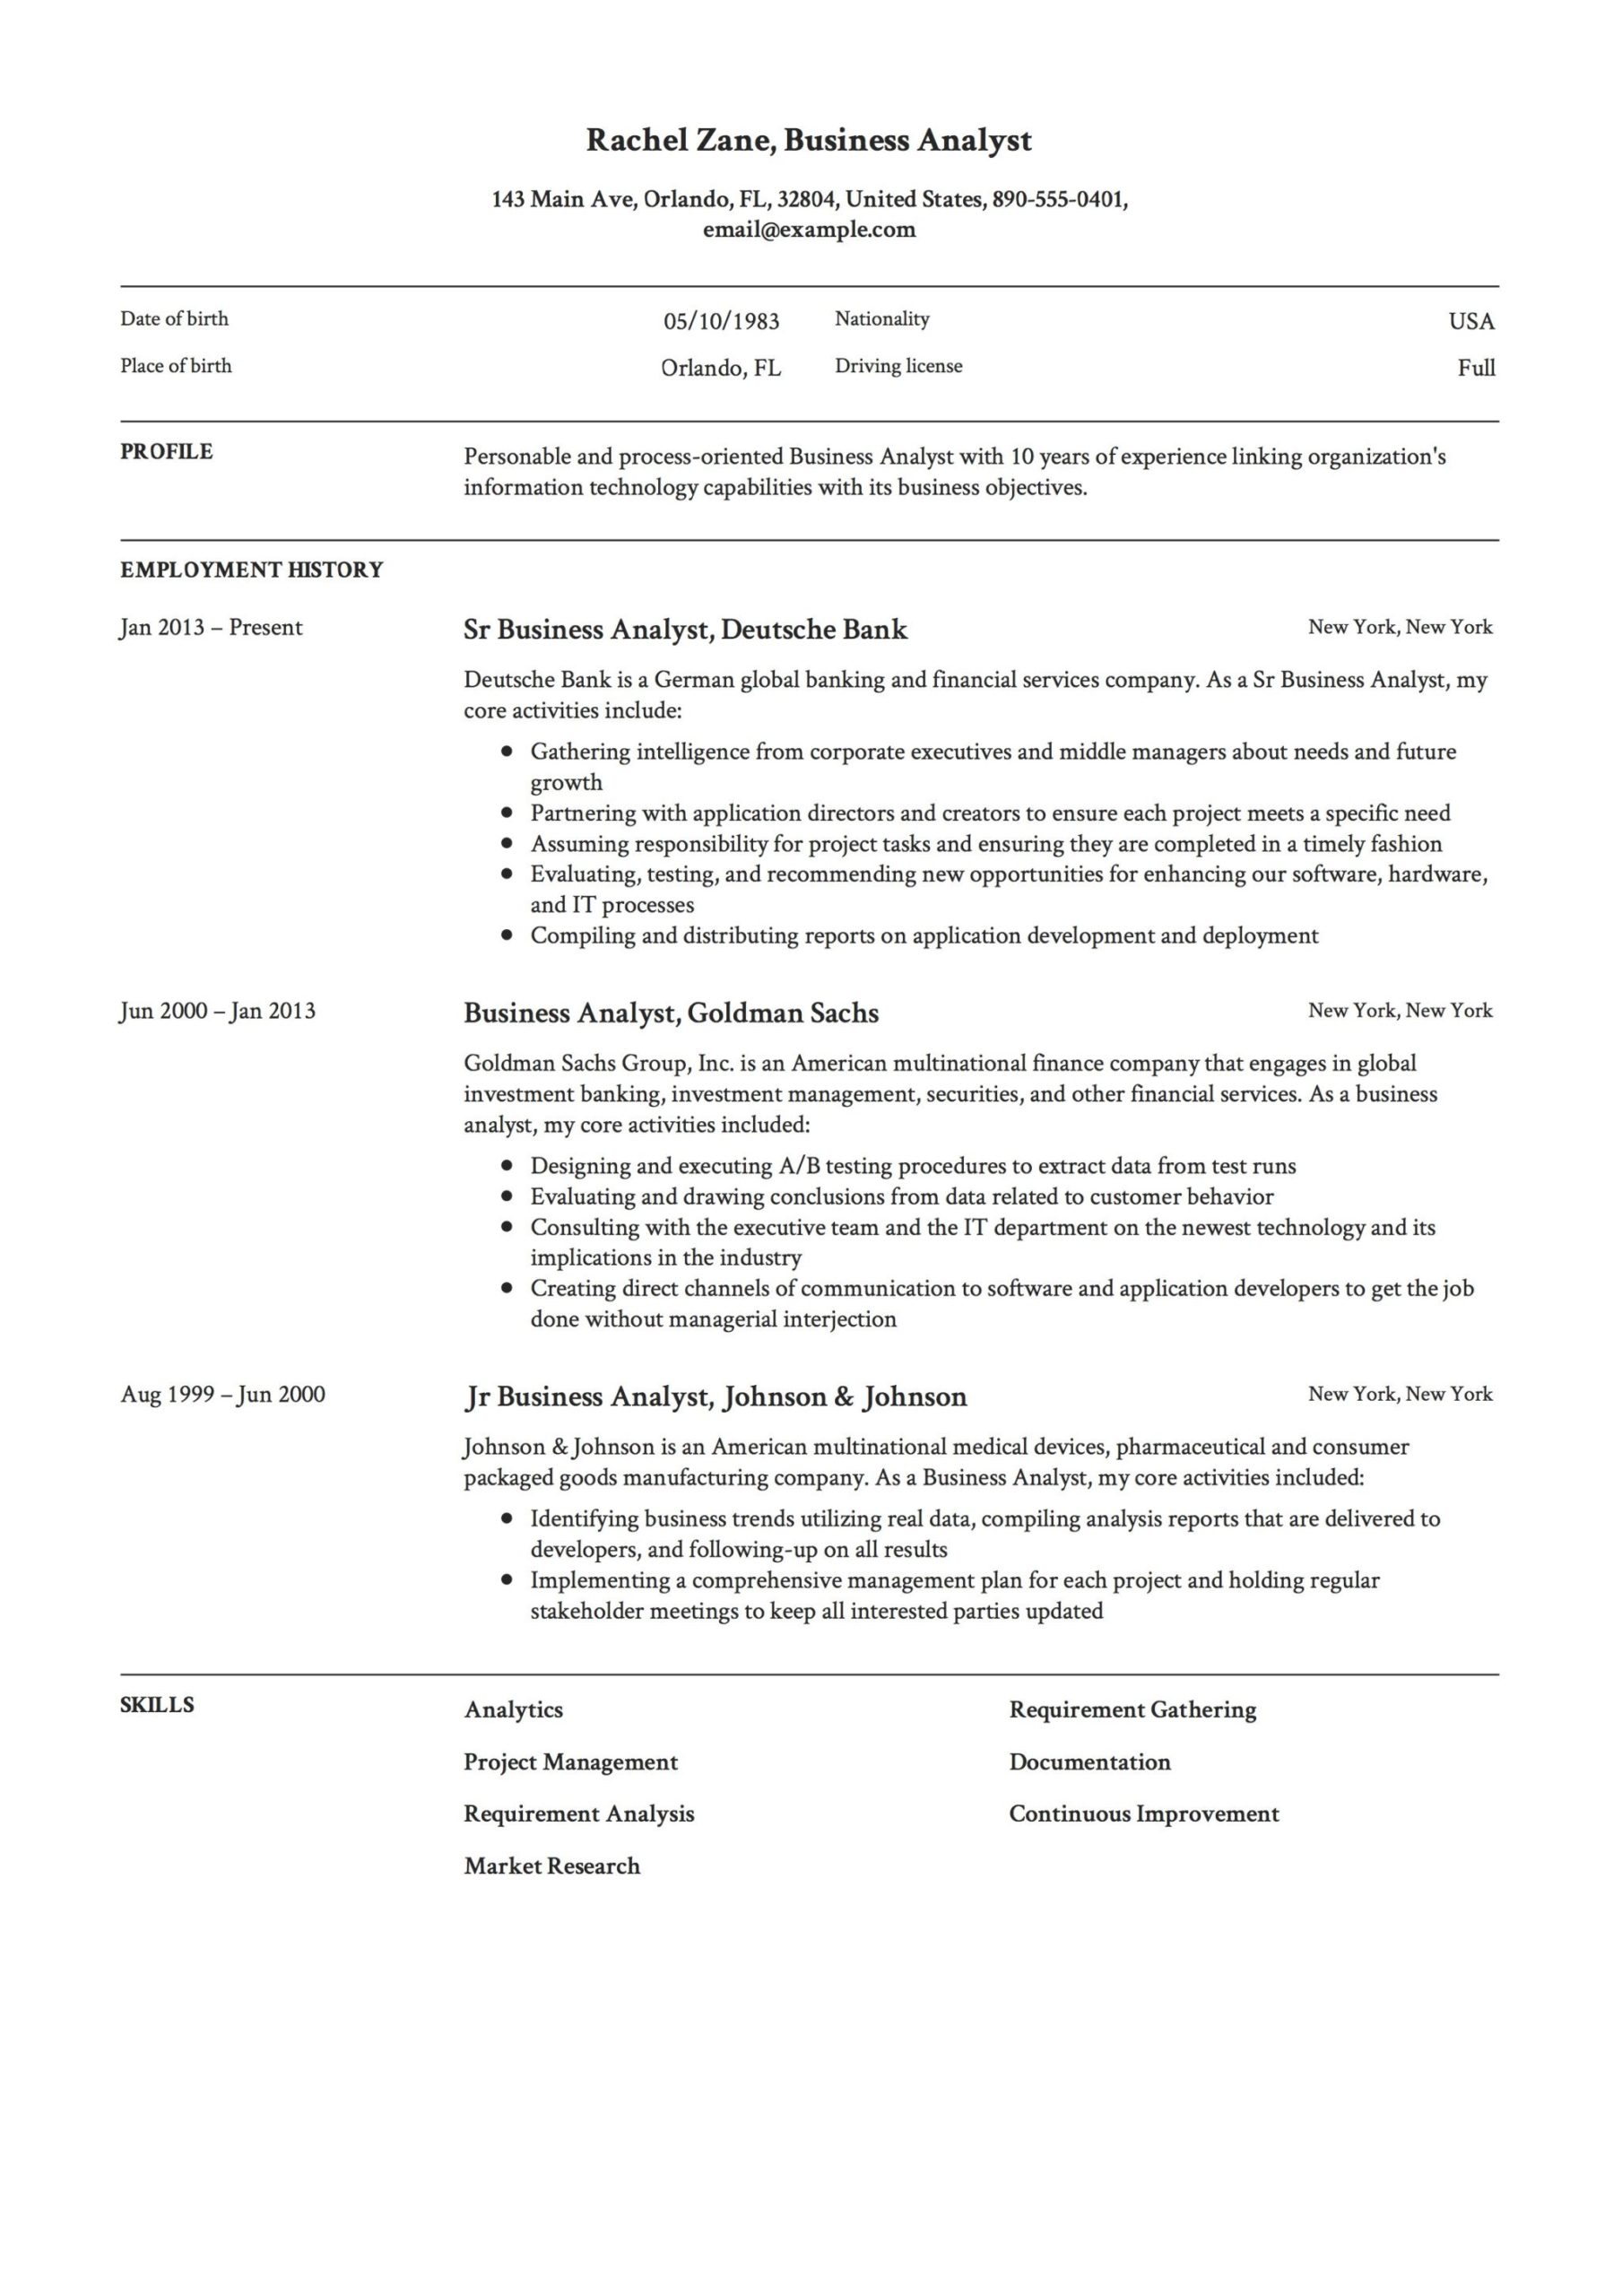 Sample Resume for Business Analyst Retail Domain Business Analyst Resume Examples & Writing Guide 2022